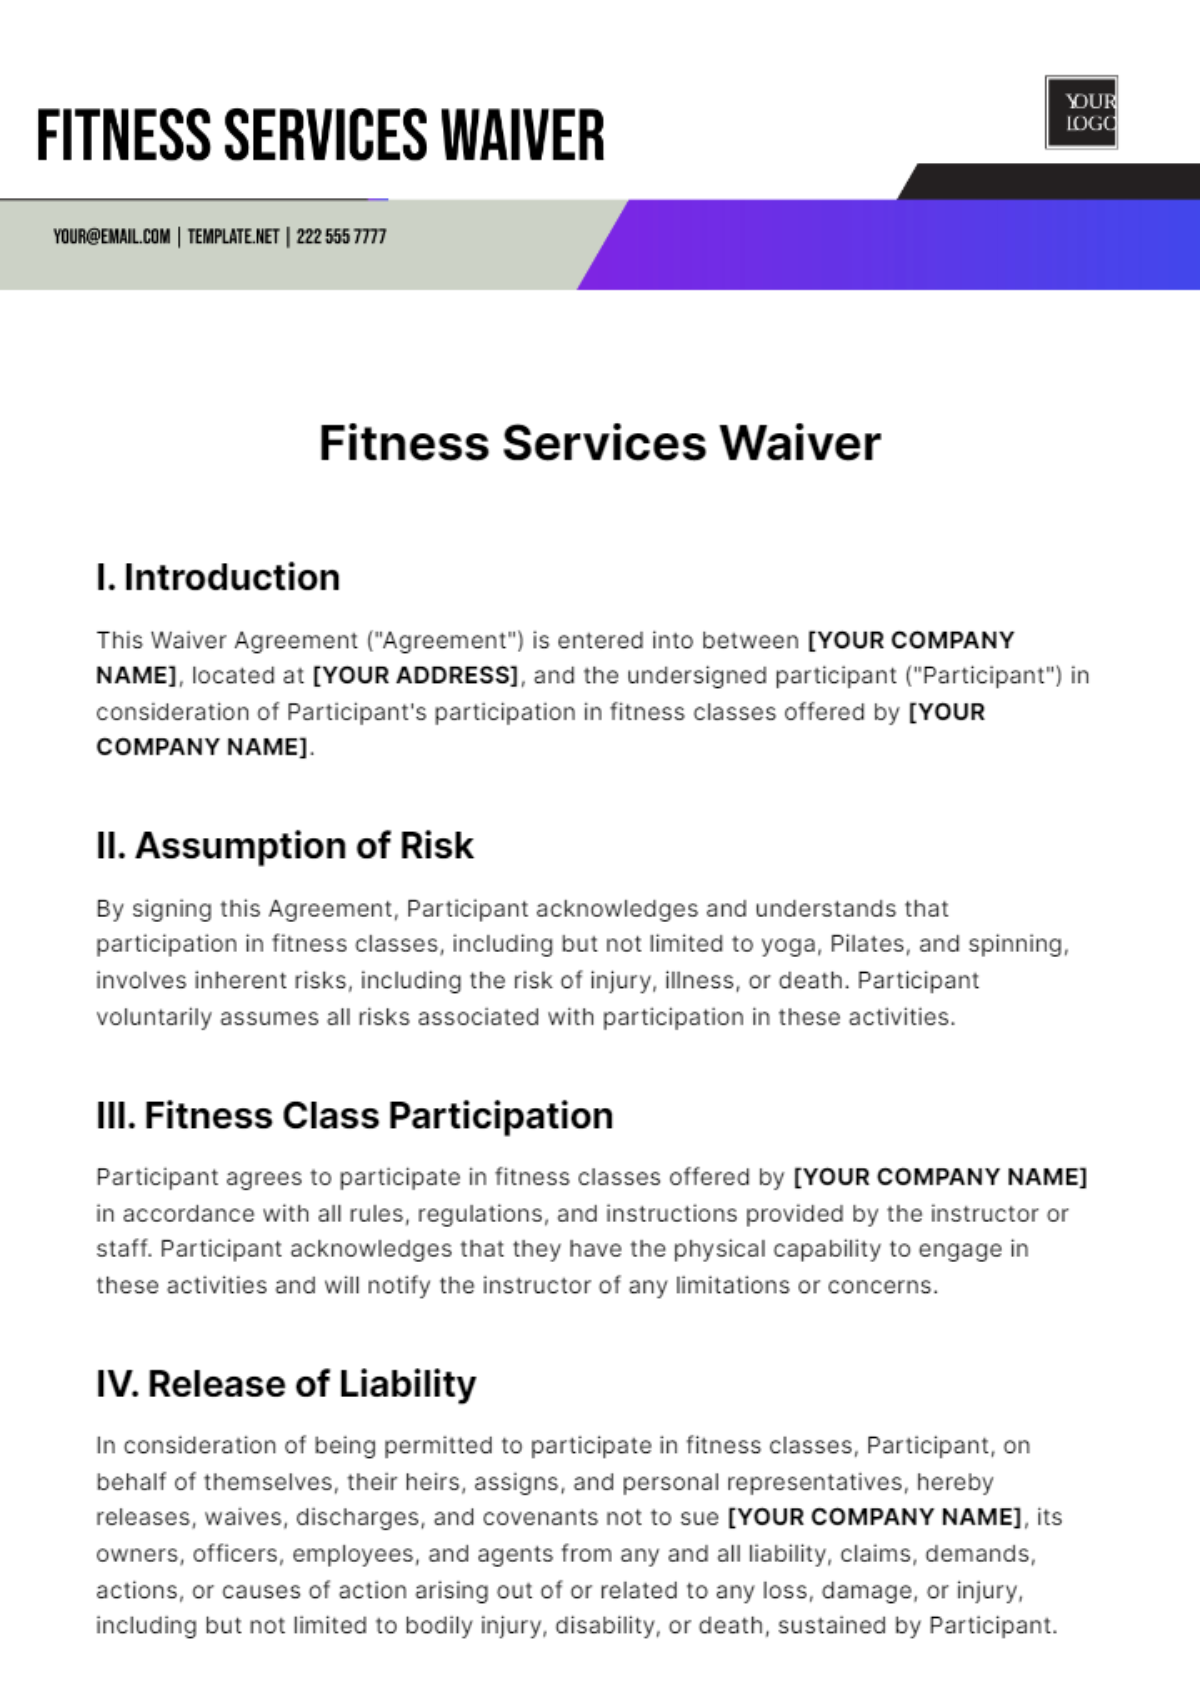 Free Fitness Services Waiver Template